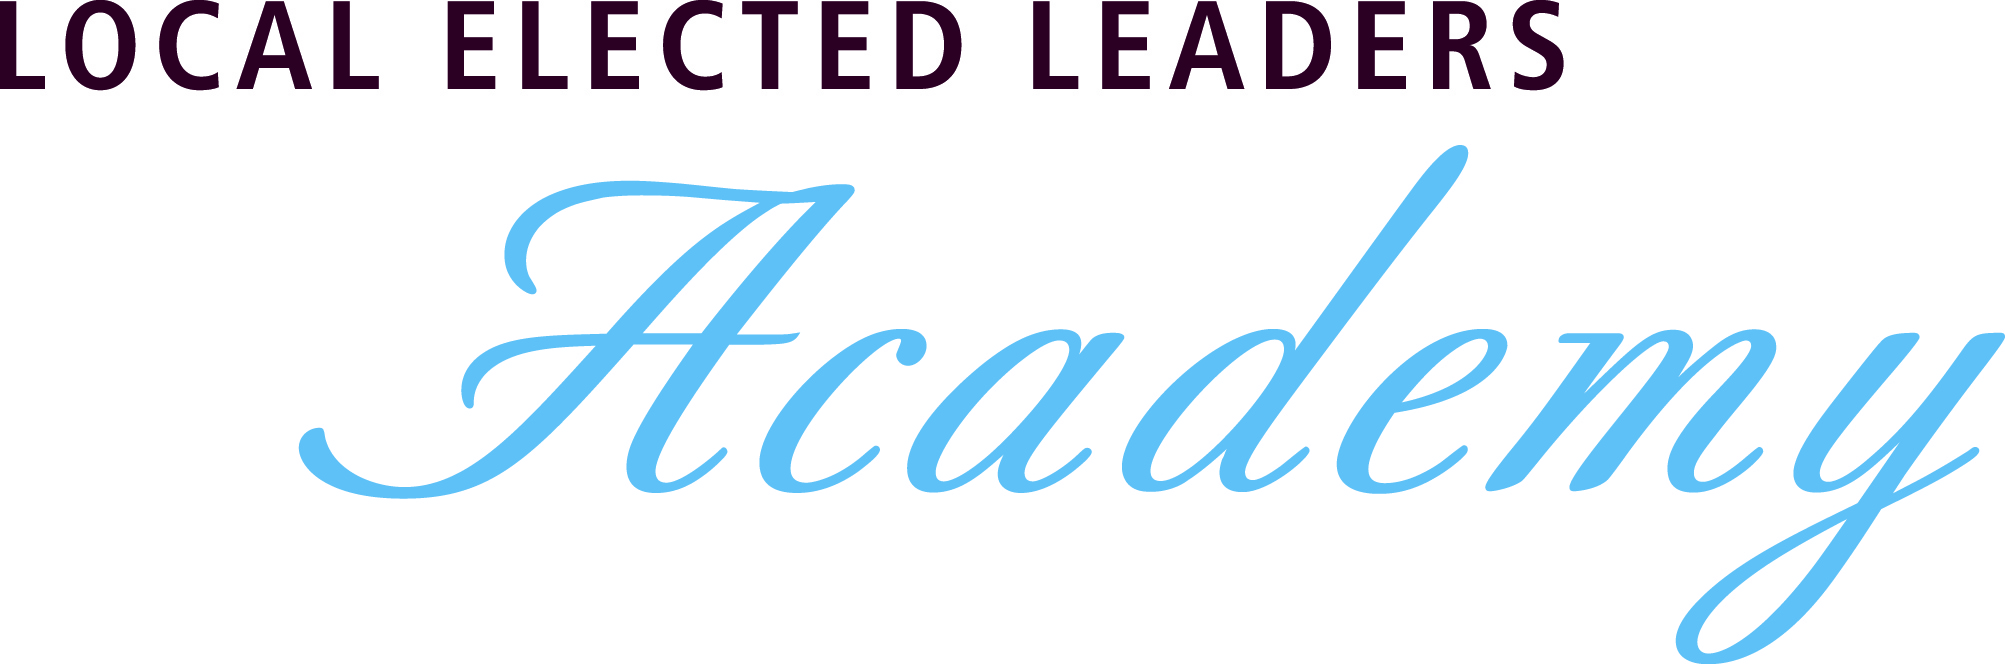 Local Elected Leaders Academy logo